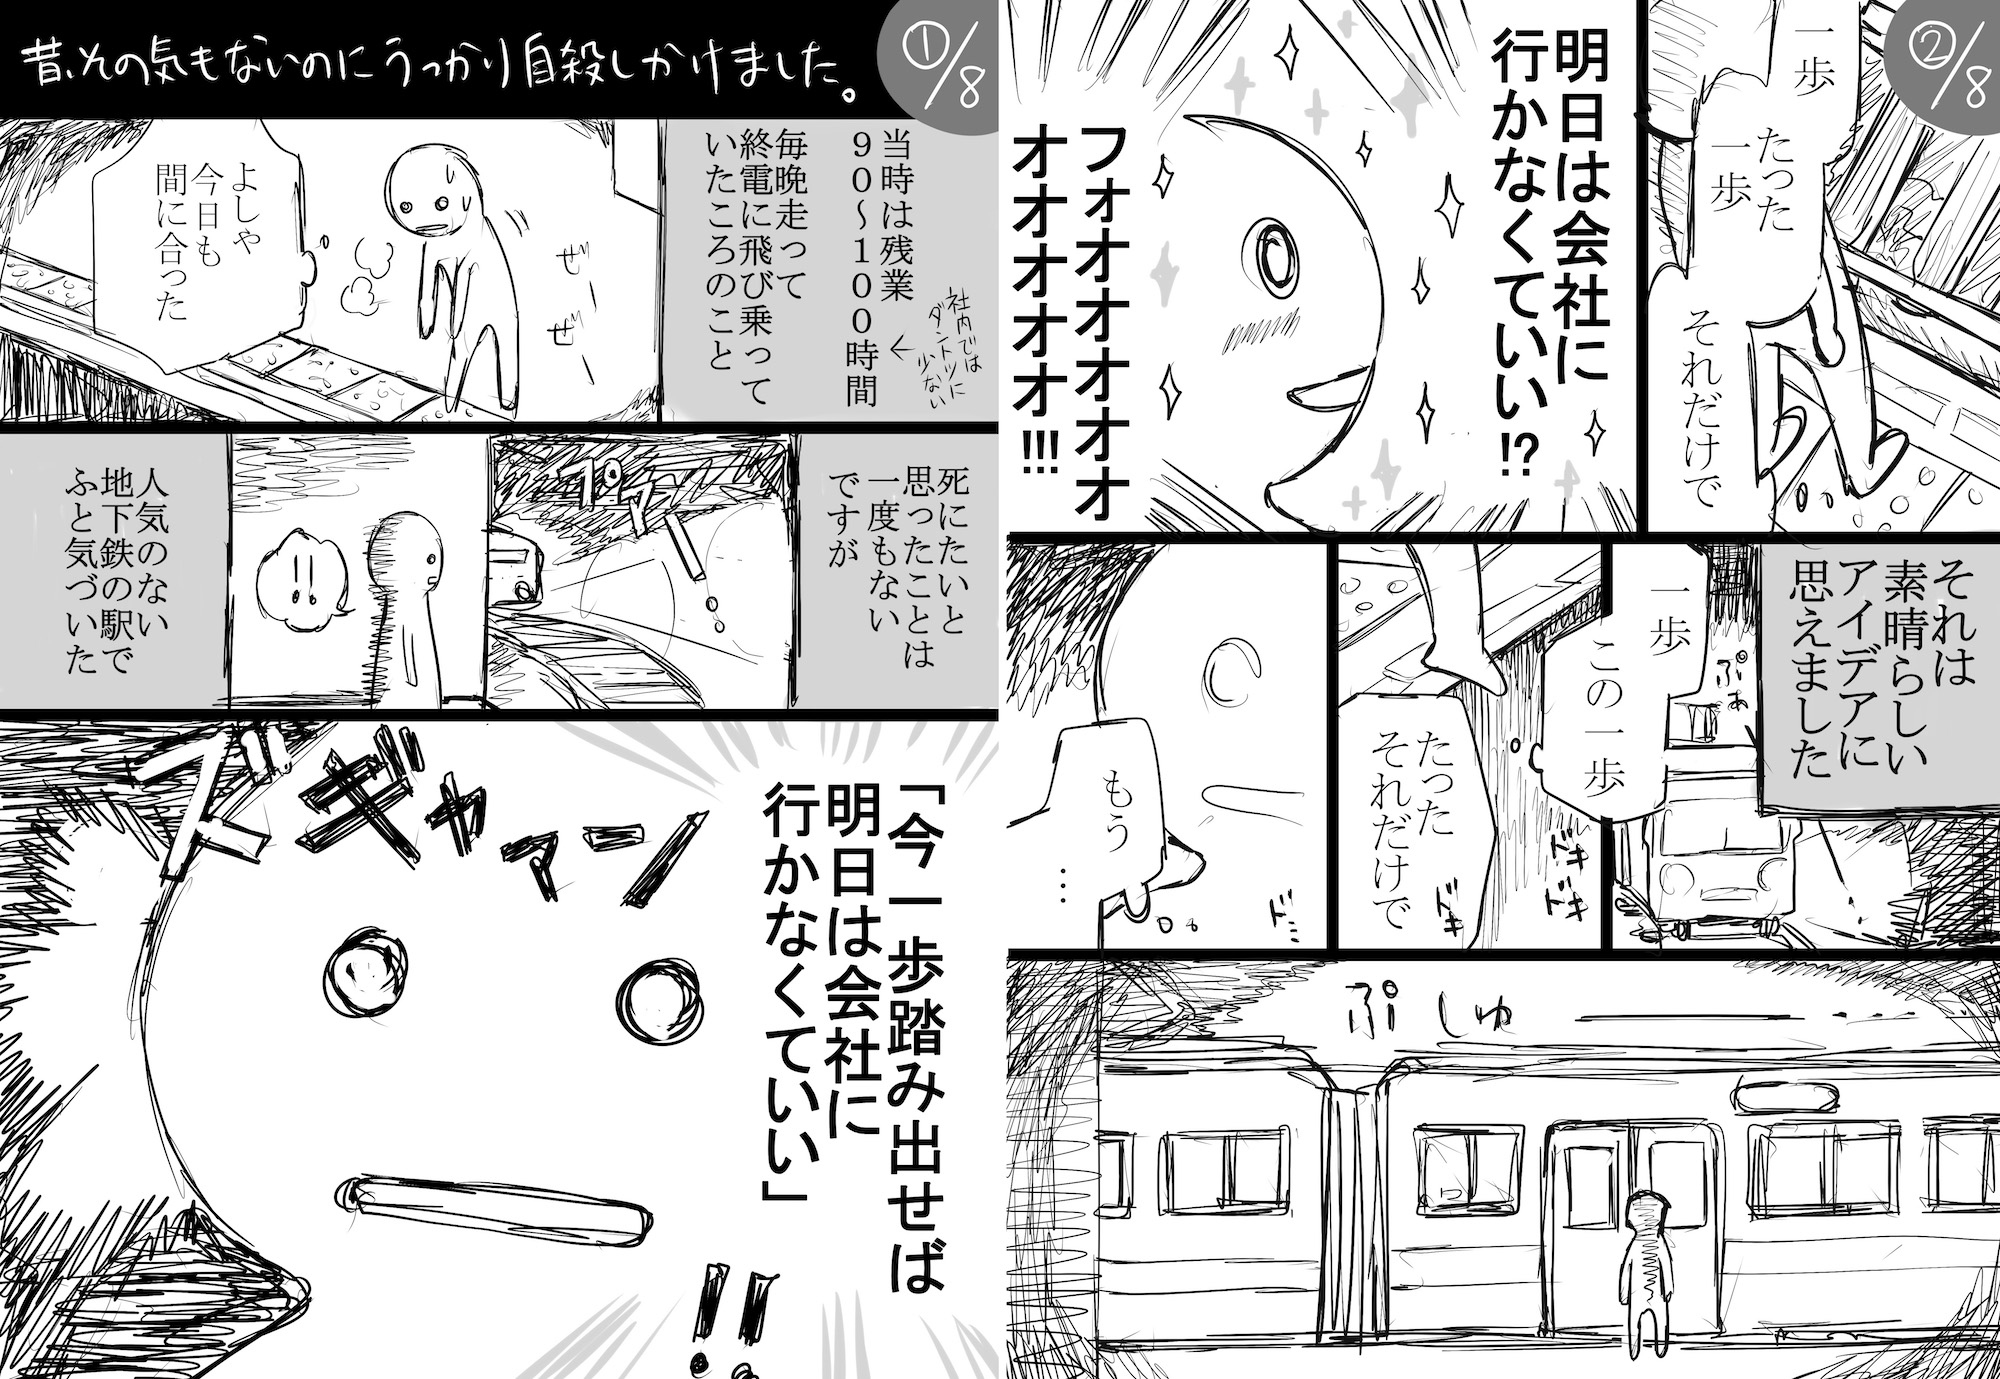 Illustrator Kona Shiomachi's manga on karoshi (death from overwork) had been retweeted over 131,000 times as of Friday since being posted Tuesday on Twitter. | COURTESY OF KONA SHIOMACHI